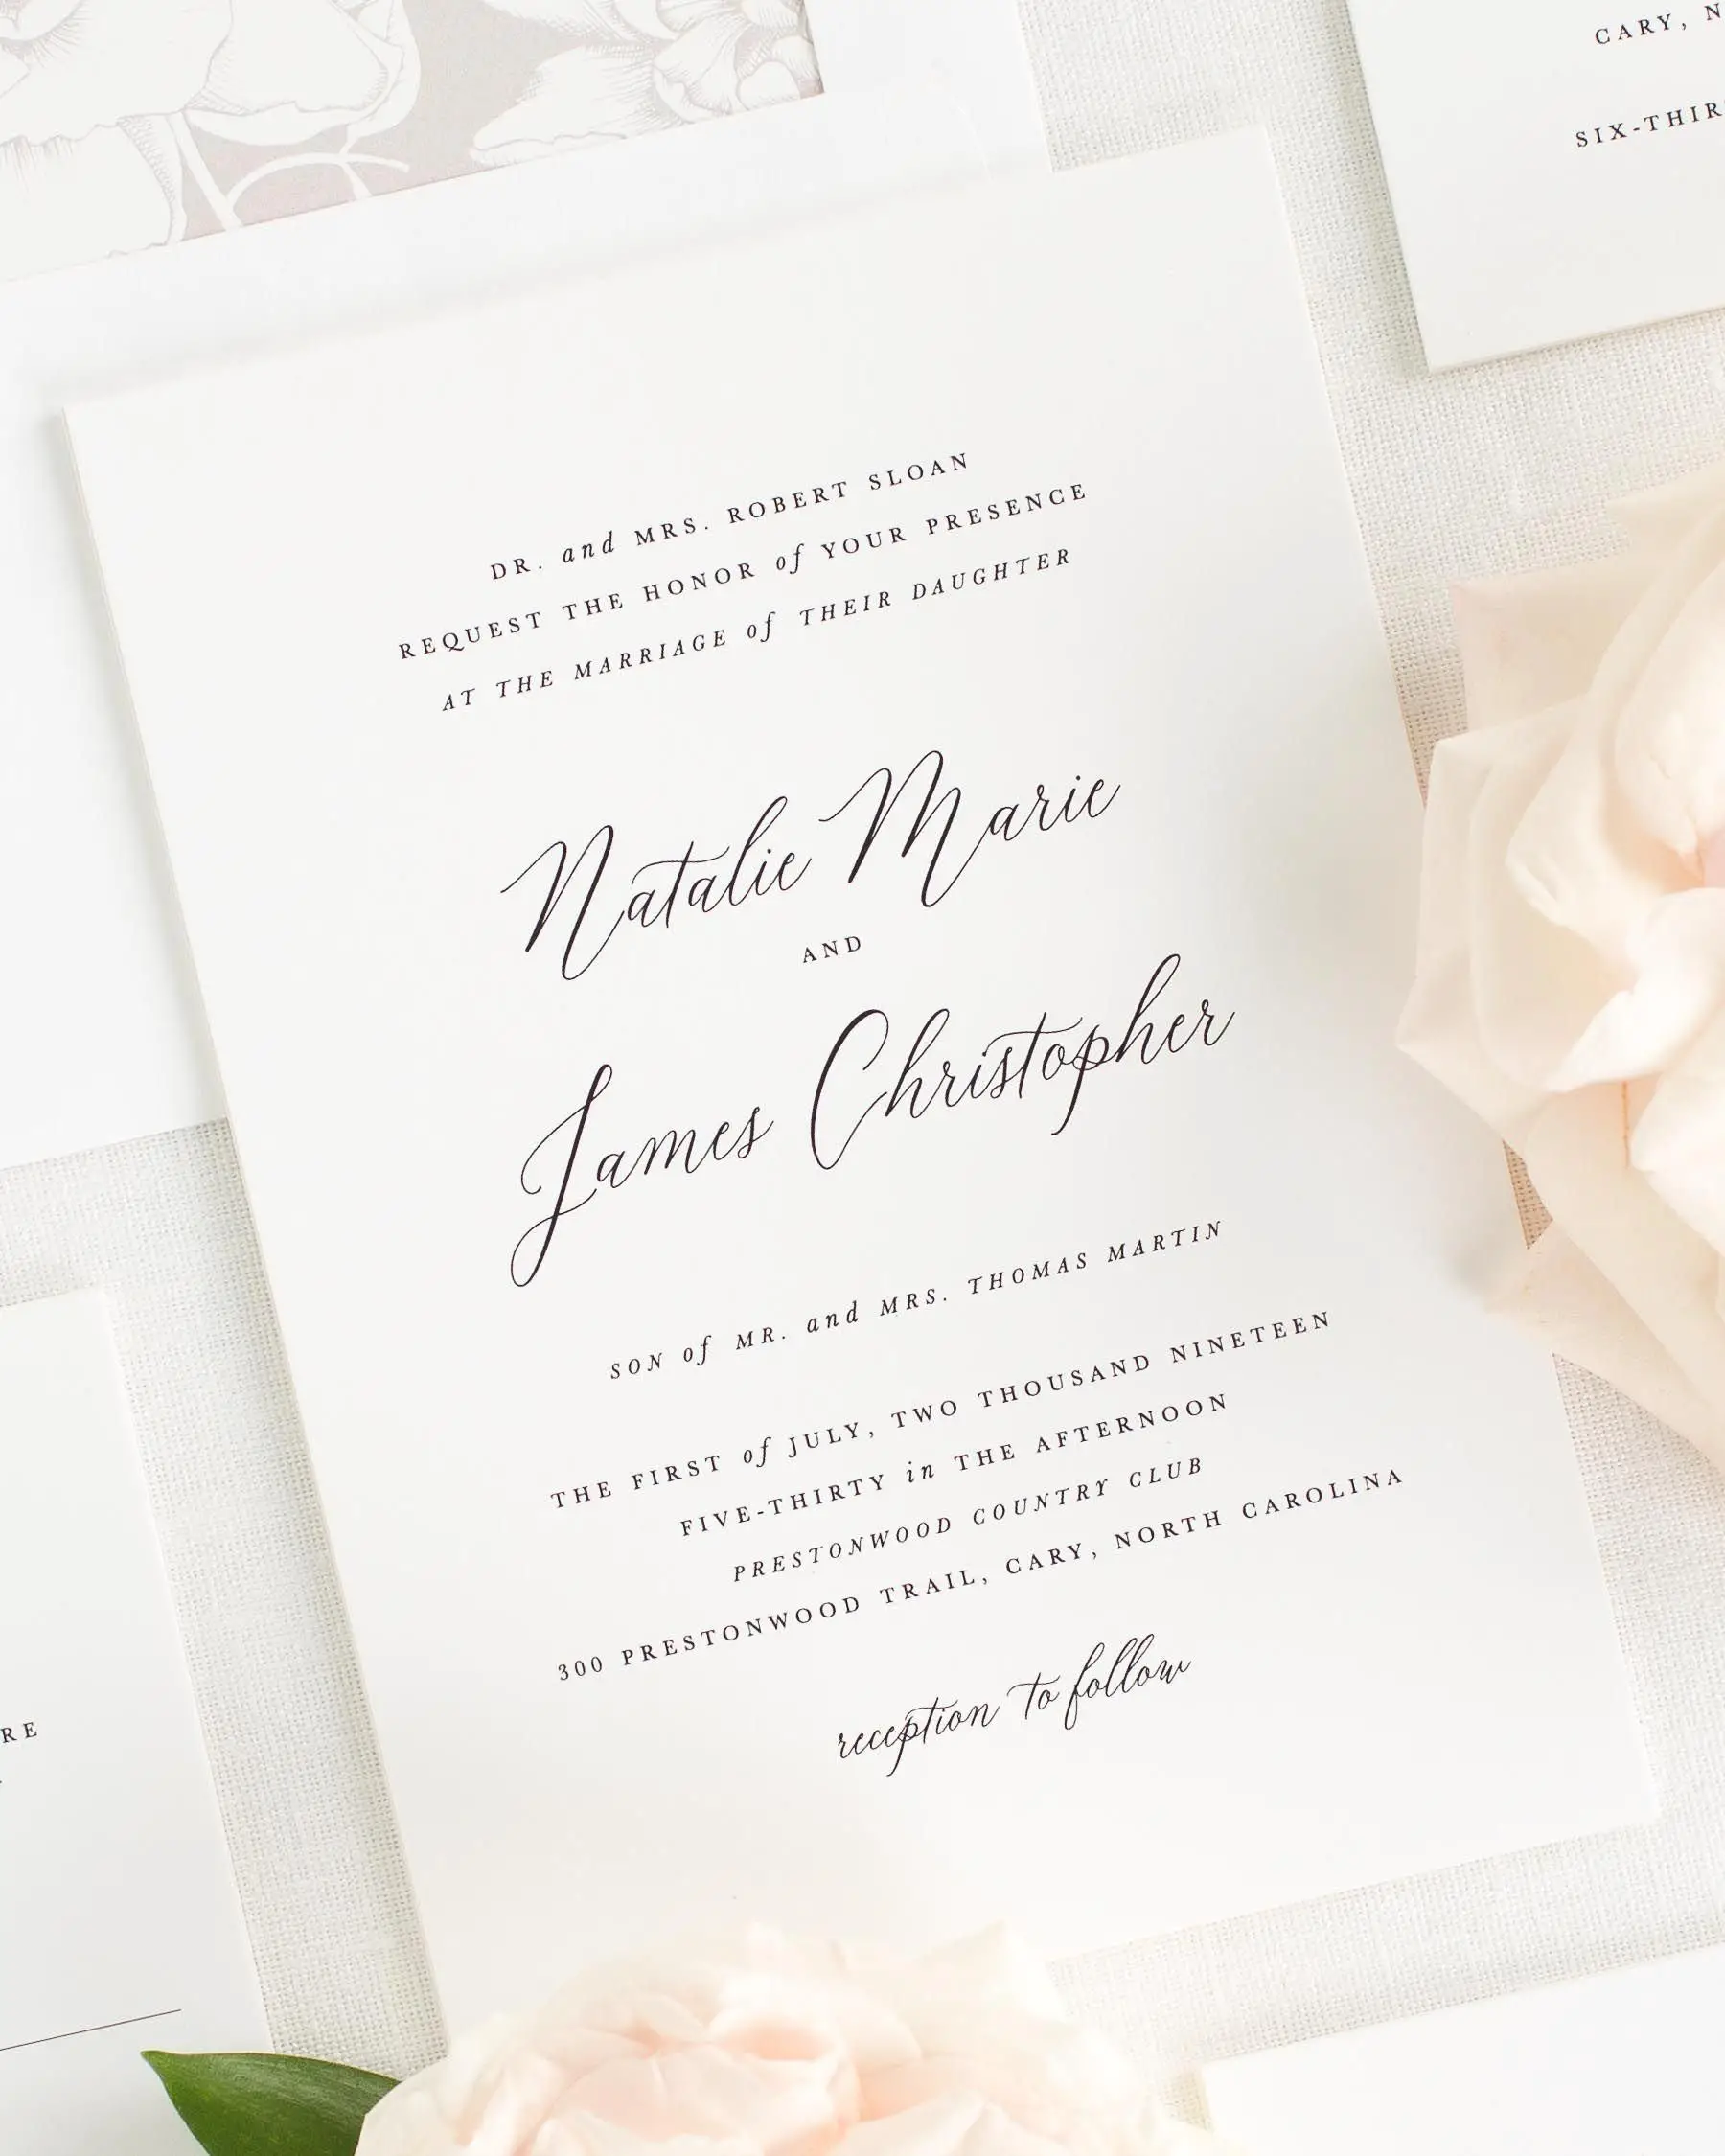 Many wedding event invitation companies can offer a choice of templates ...